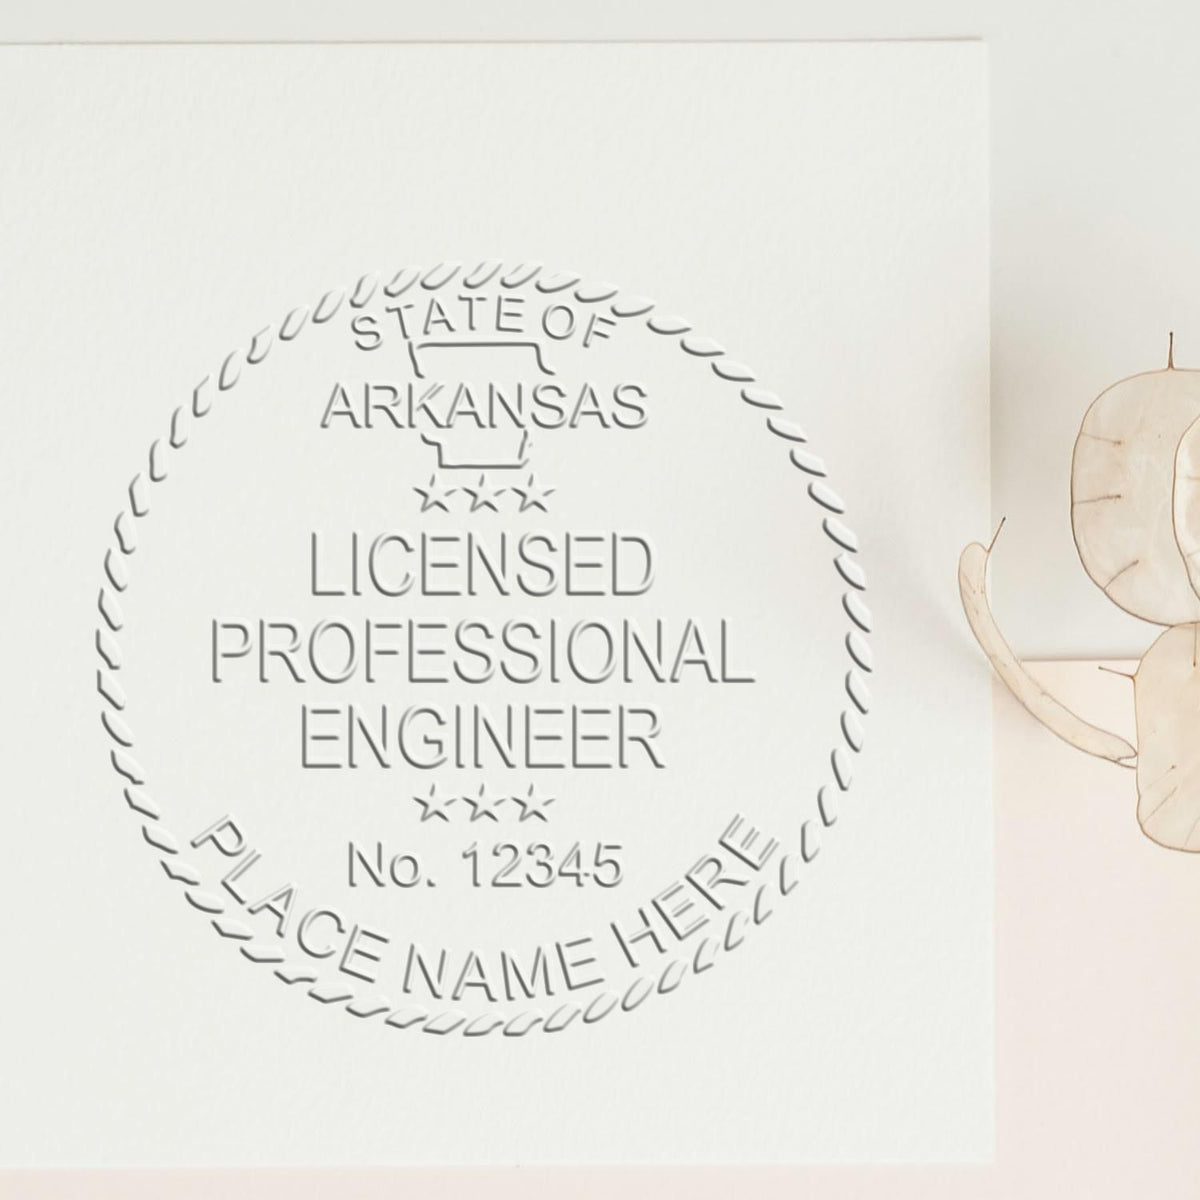 The State of Arkansas Extended Long Reach Engineer Seal stamp impression comes to life with a crisp, detailed photo on paper - showcasing true professional quality.